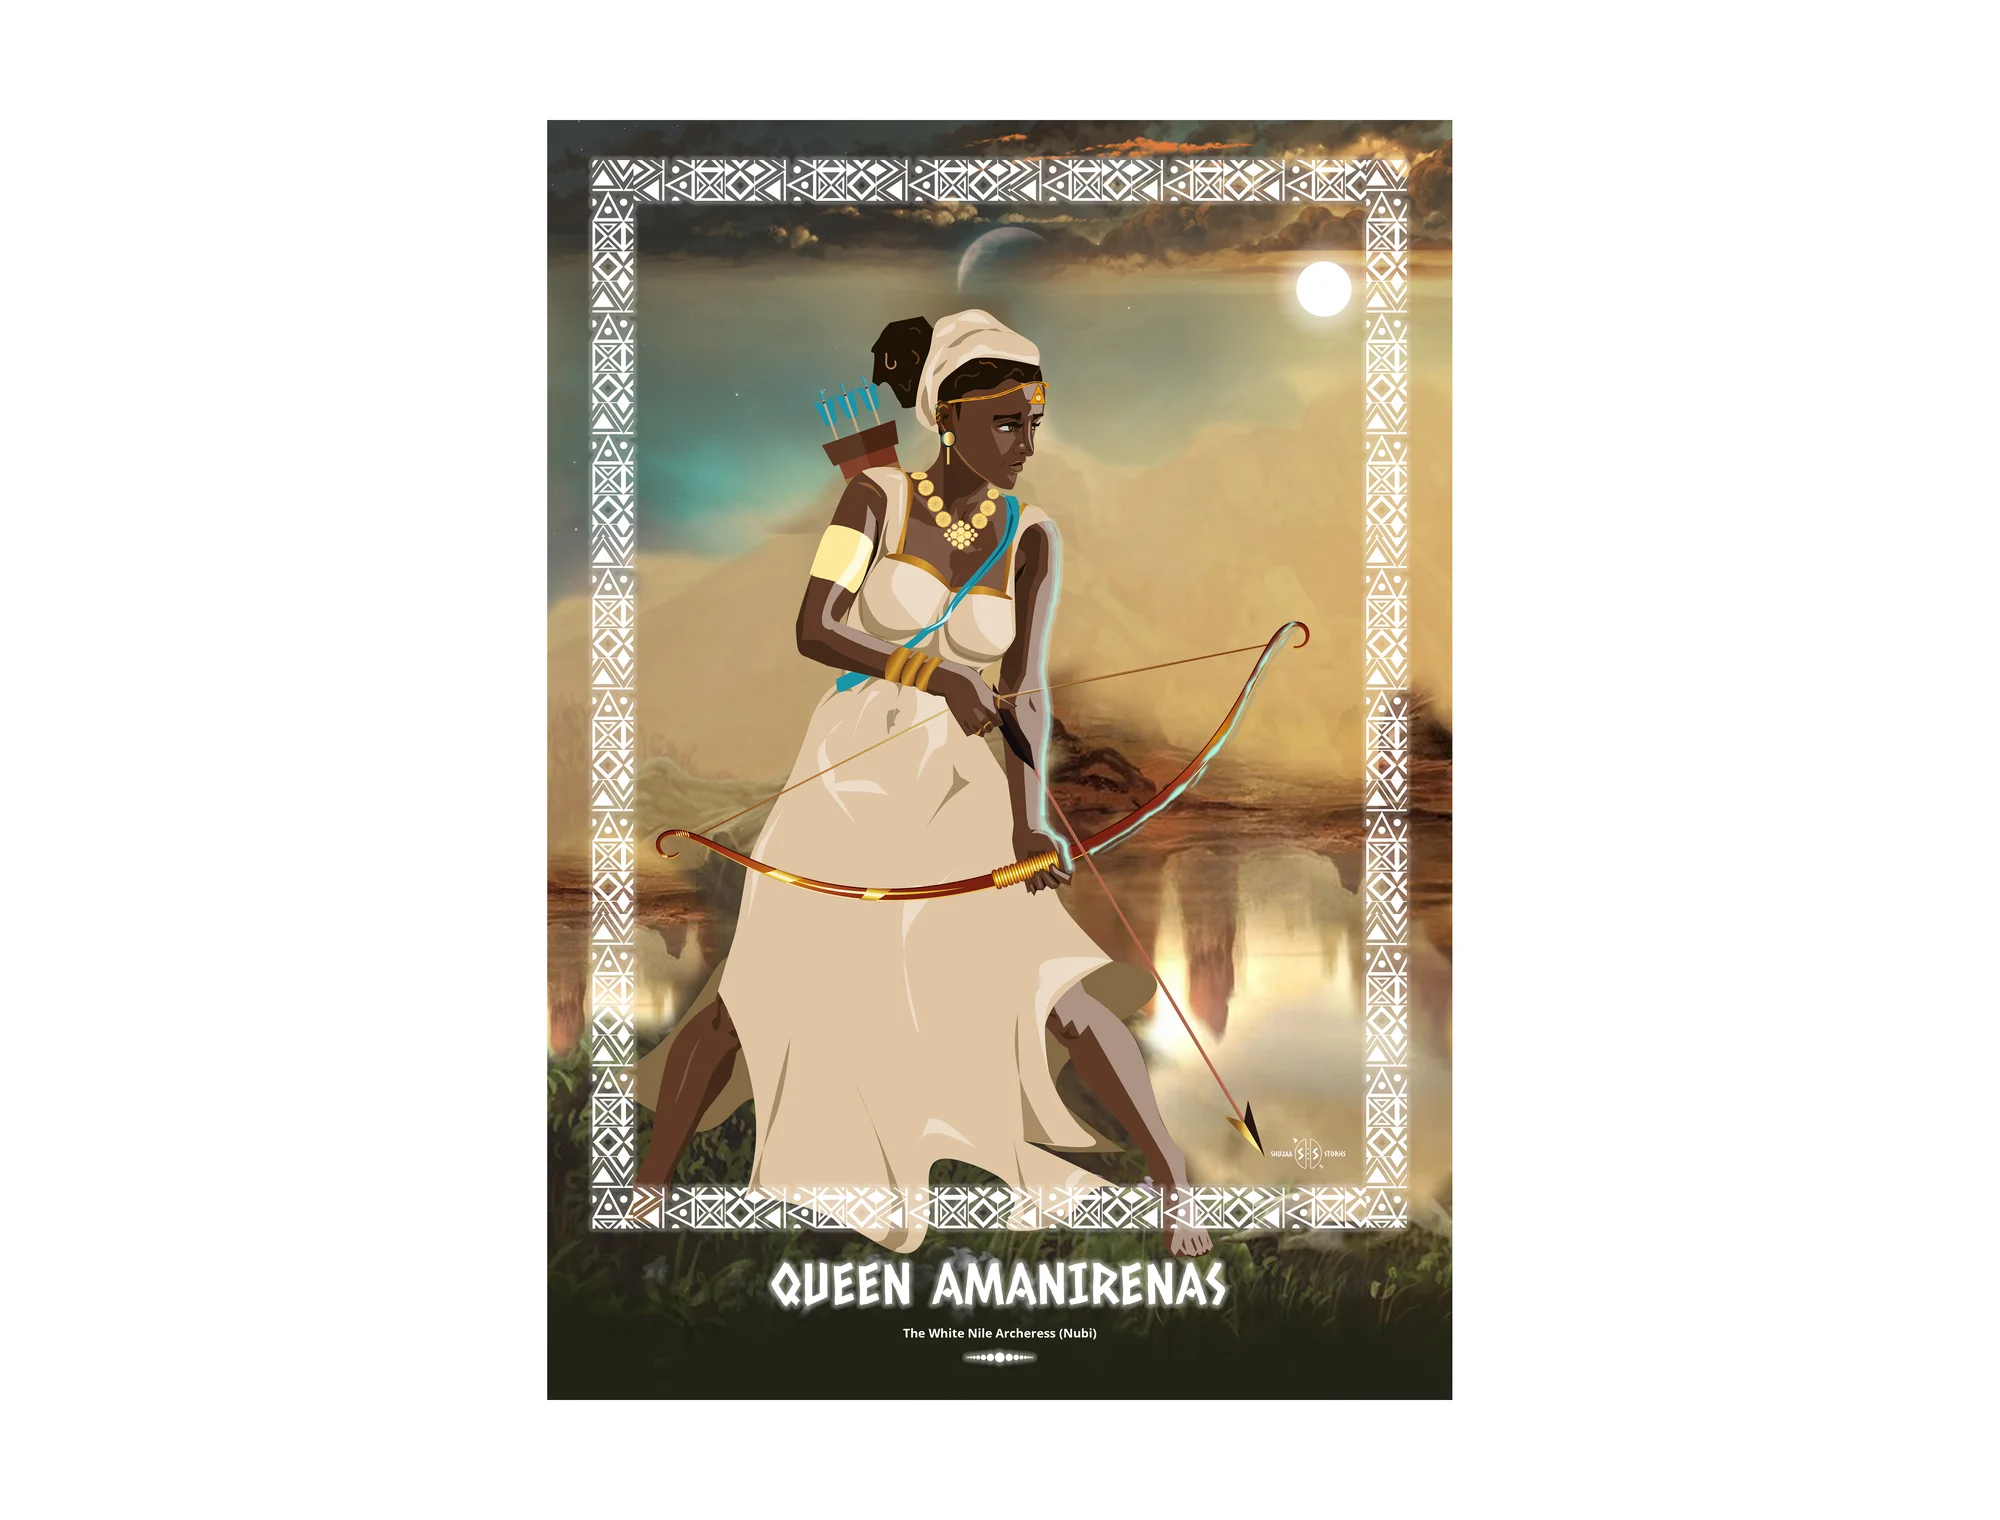 Queen Amanirenas: The White Nile Archeress (Nubi community) - National Museums of Kenya and Shujaa Stories